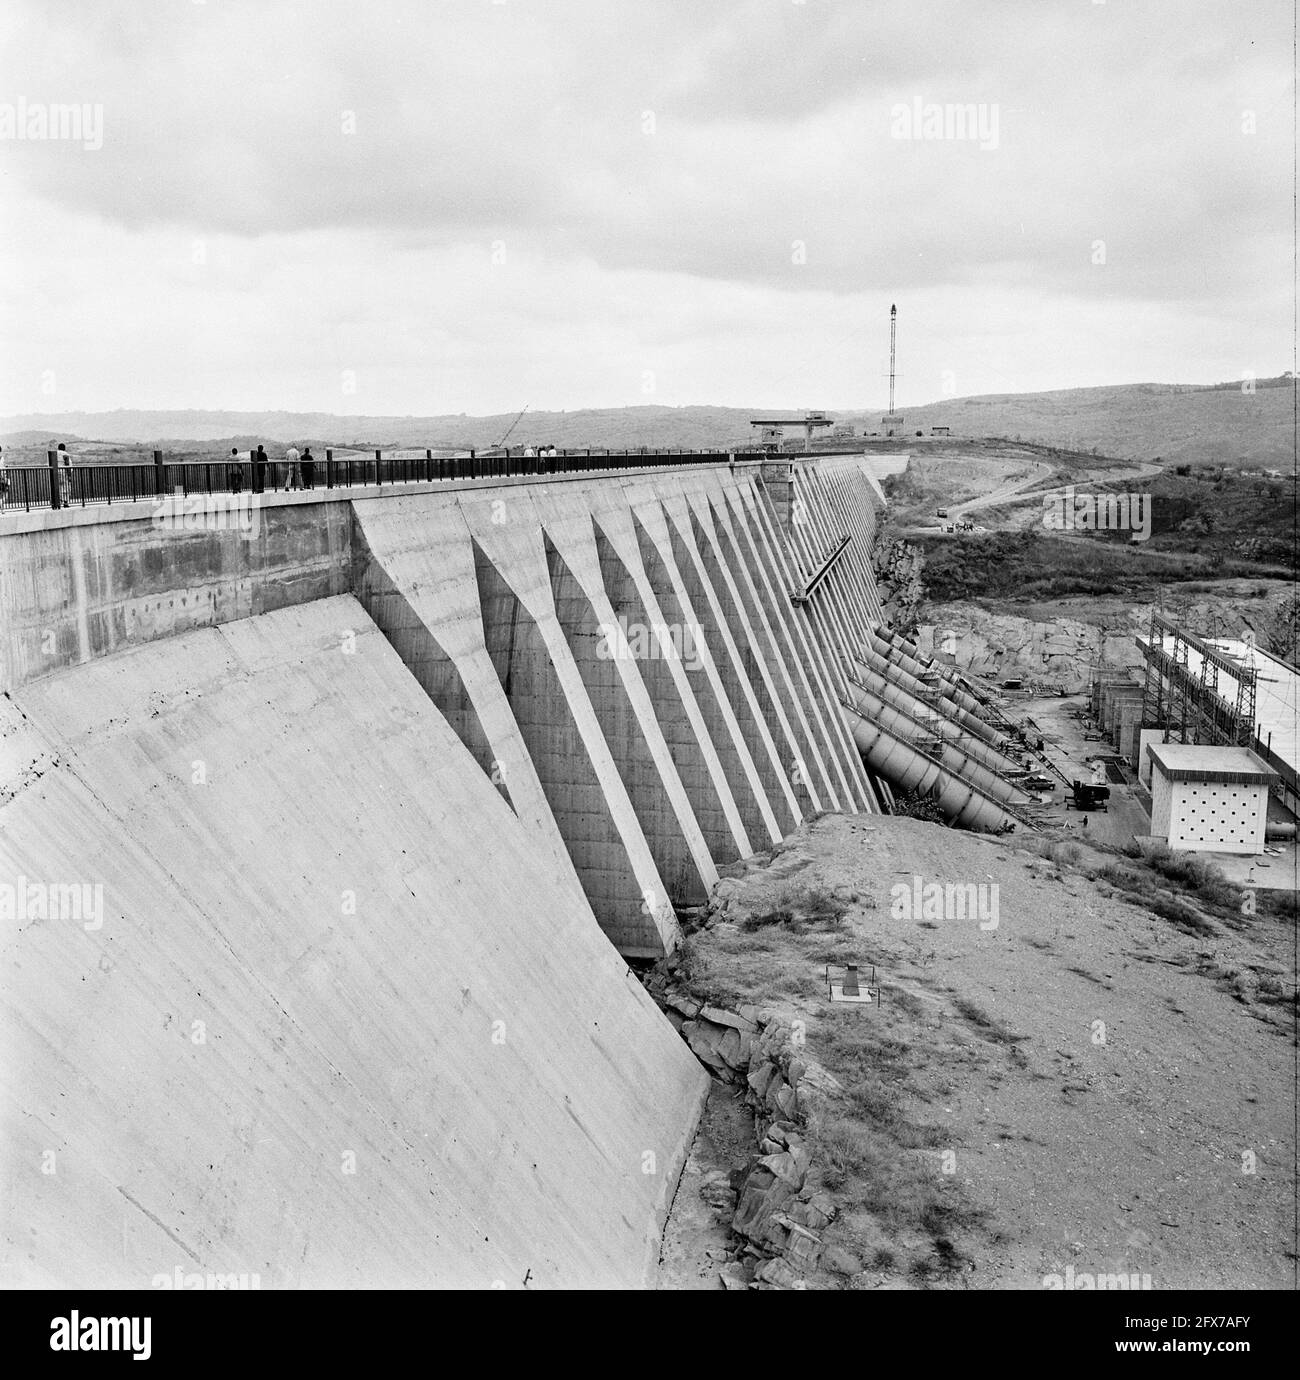 Inga project, a dam in river Zaire, October 24, 1973, rivers, dams, The Netherlands, 20th century press agency photo, news to remember, documentary, historic photography 1945-1990, visual stories, human history of the Twentieth Century, capturing moments in time Stock Photo